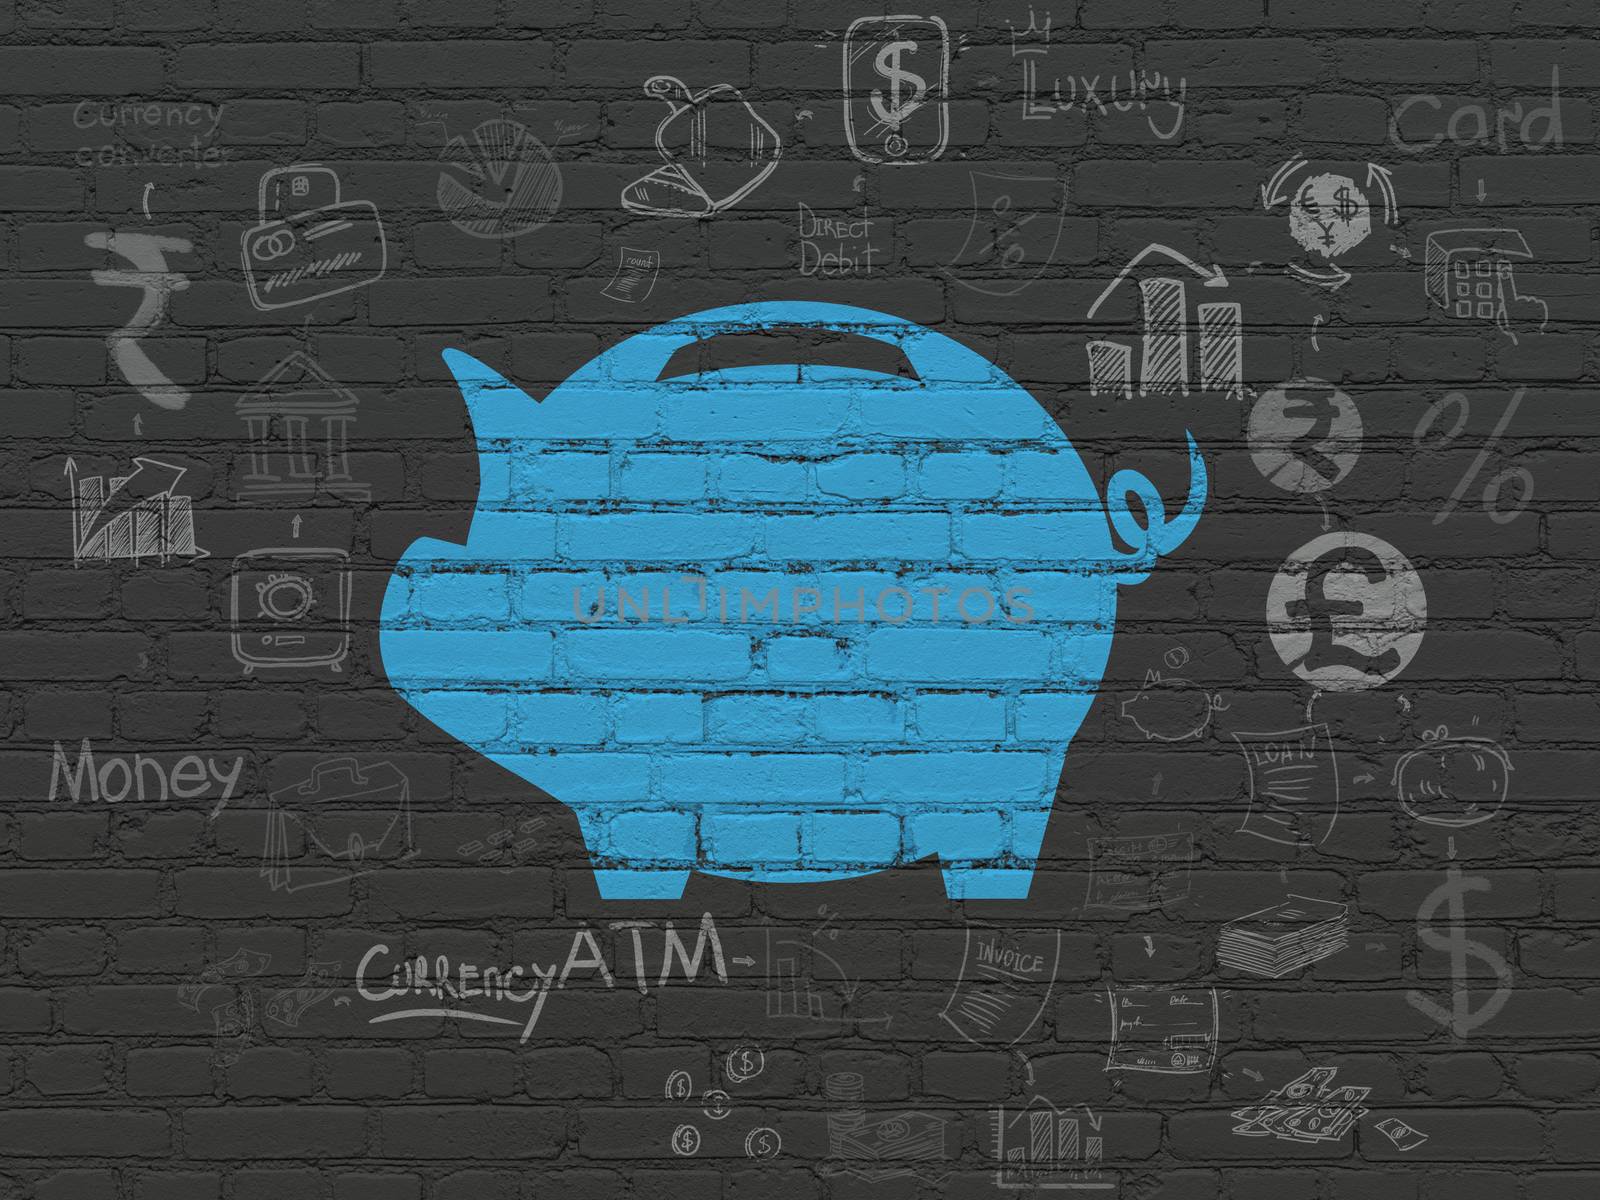 Money concept: Painted blue Money Box icon on Black Brick wall background with Scheme Of Hand Drawn Finance Icons